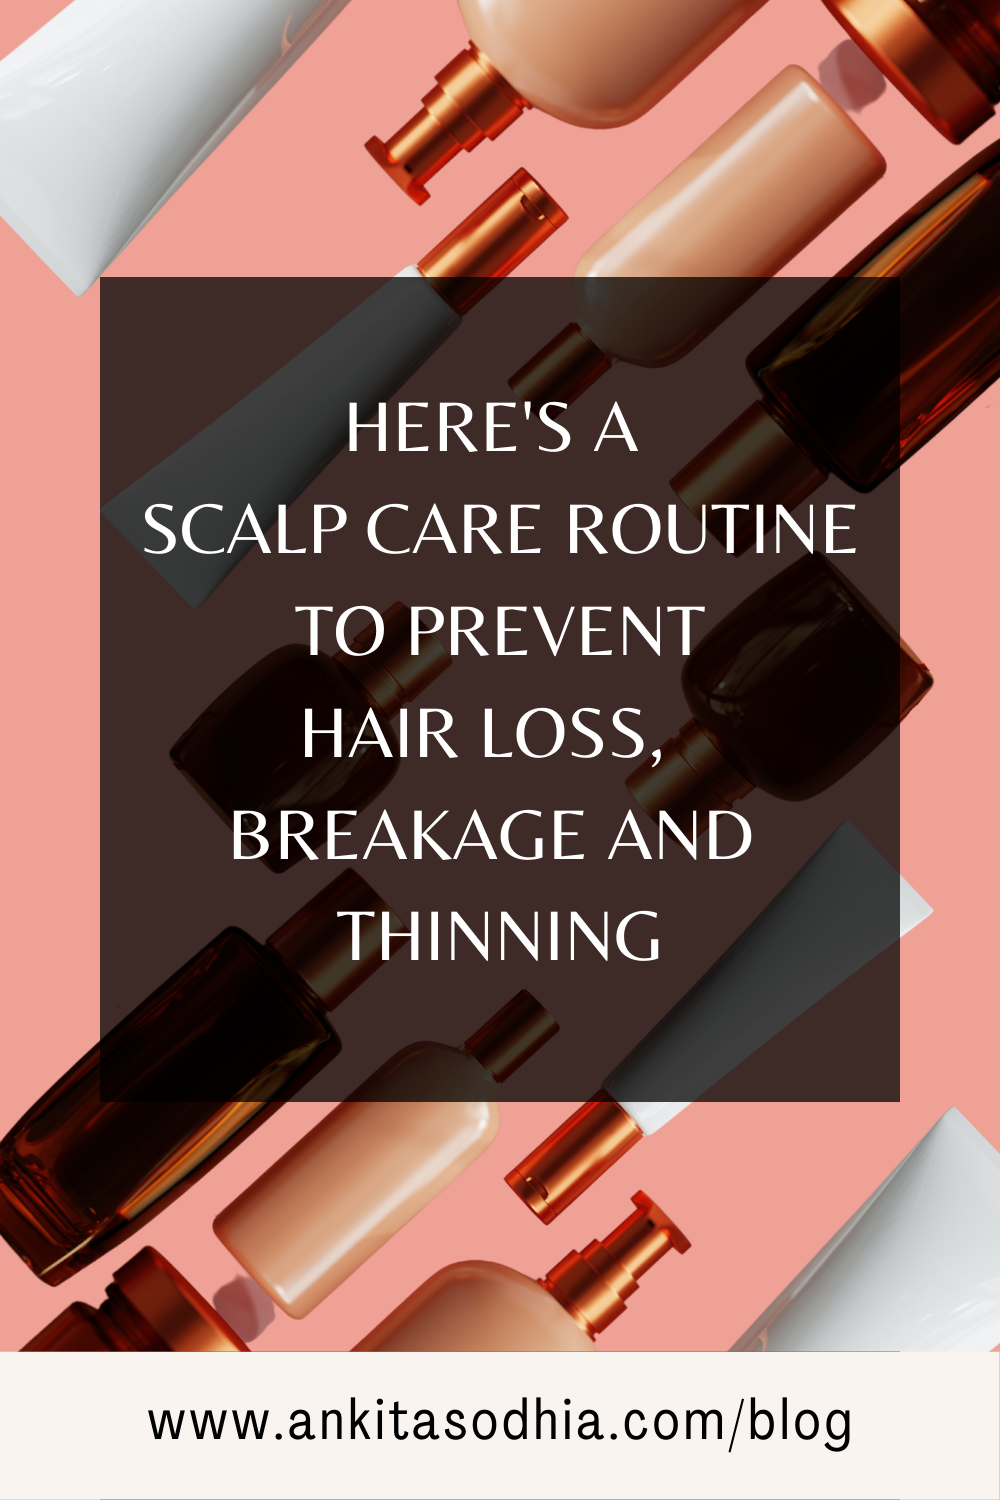 Here's A Scalp Care Routine To Prevent Hair Loss, Breakage And Thinning |  Ankita Sodhia's Blog